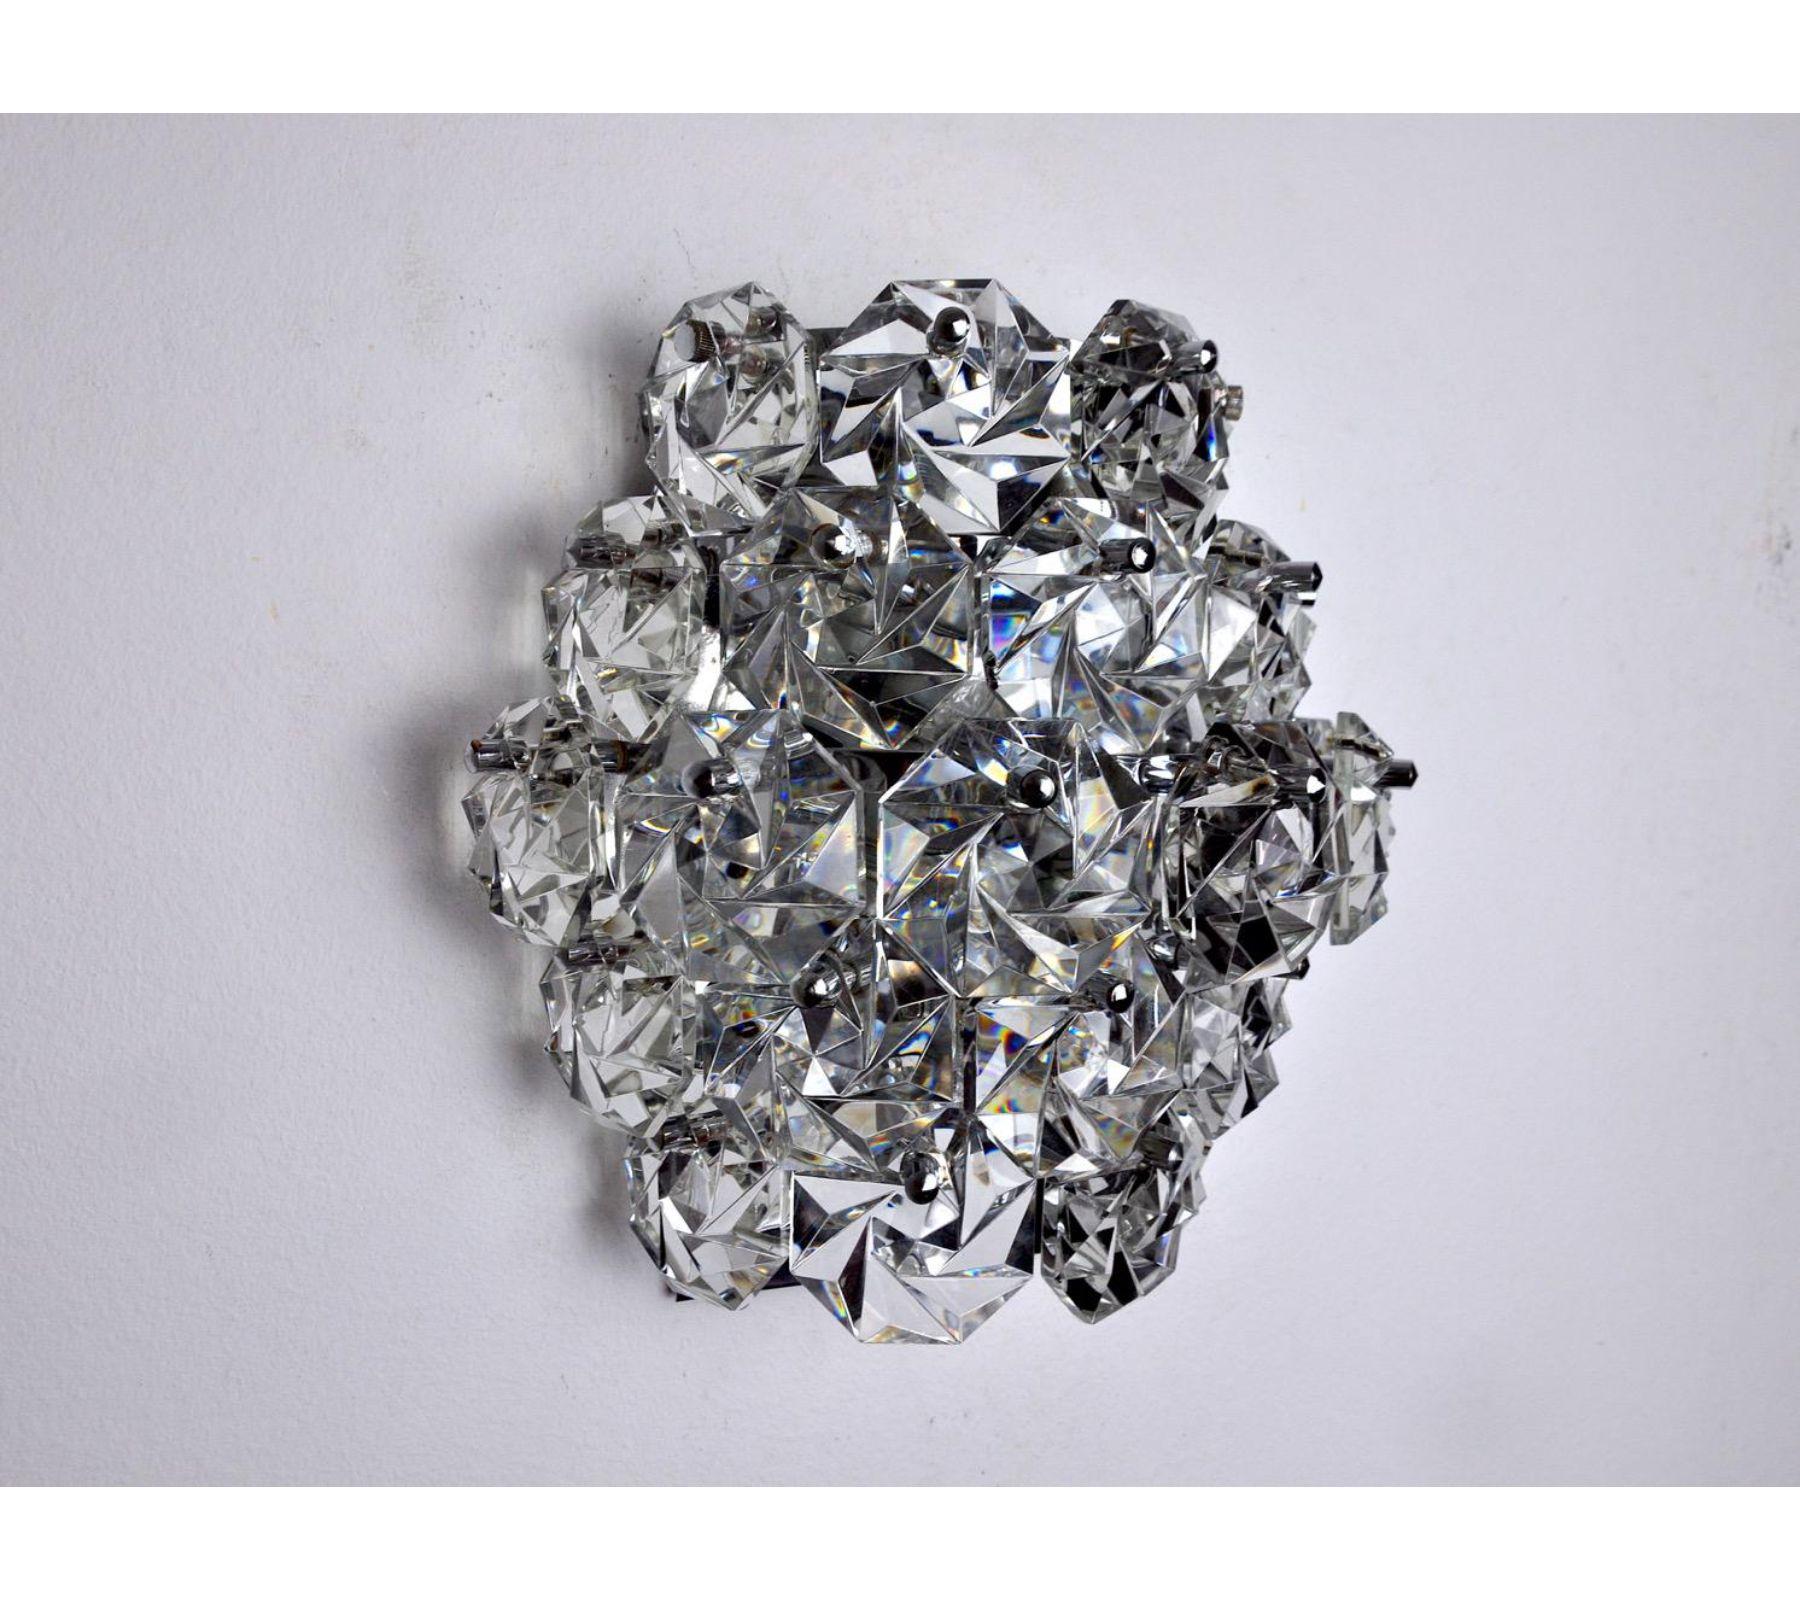 Superb kinkeldey wall lamp designed and produced in germany in the 1970s. Cut crystals spread over 5 levels of a golden metal structure. Very beautiful design object that will illuminate your interior wonderfully. Verified electricity, time marks